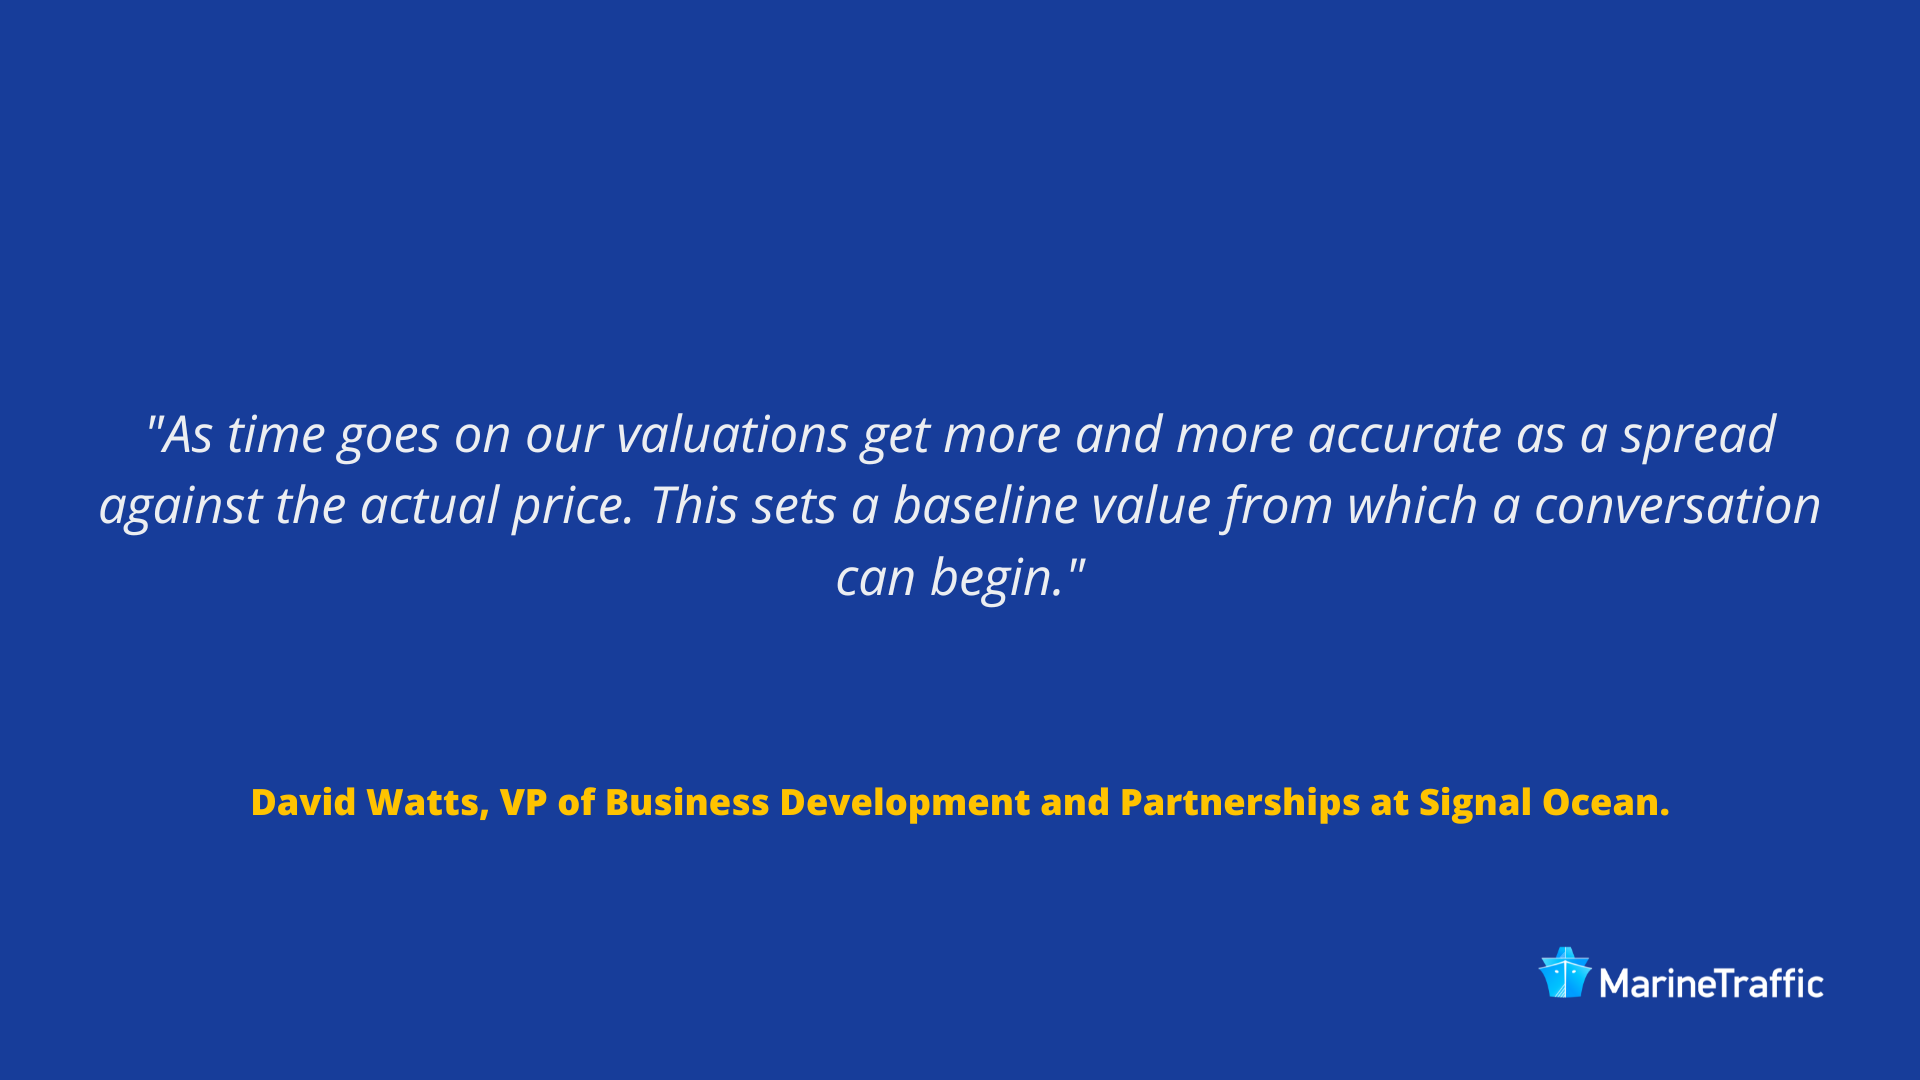 David Watts quote on Vessel Valuations